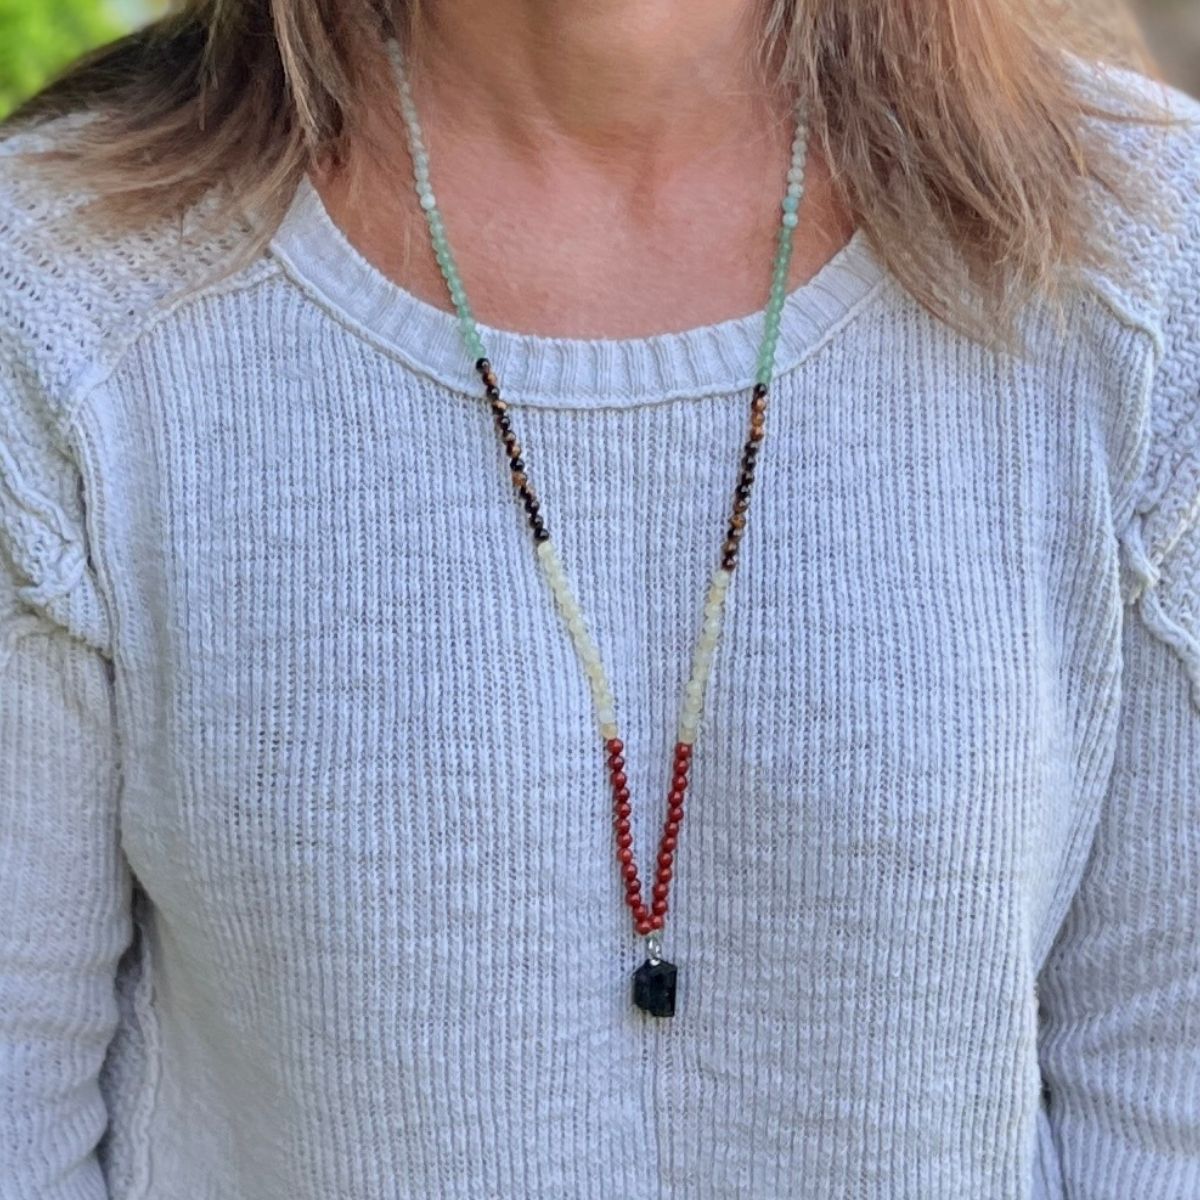 The chakras, or energy points, that exist within each of us, guide us as we come into our spiritual power. This Flowing Energy Chakra Necklace helps you align your chakras and enables a continuous energy flow. 